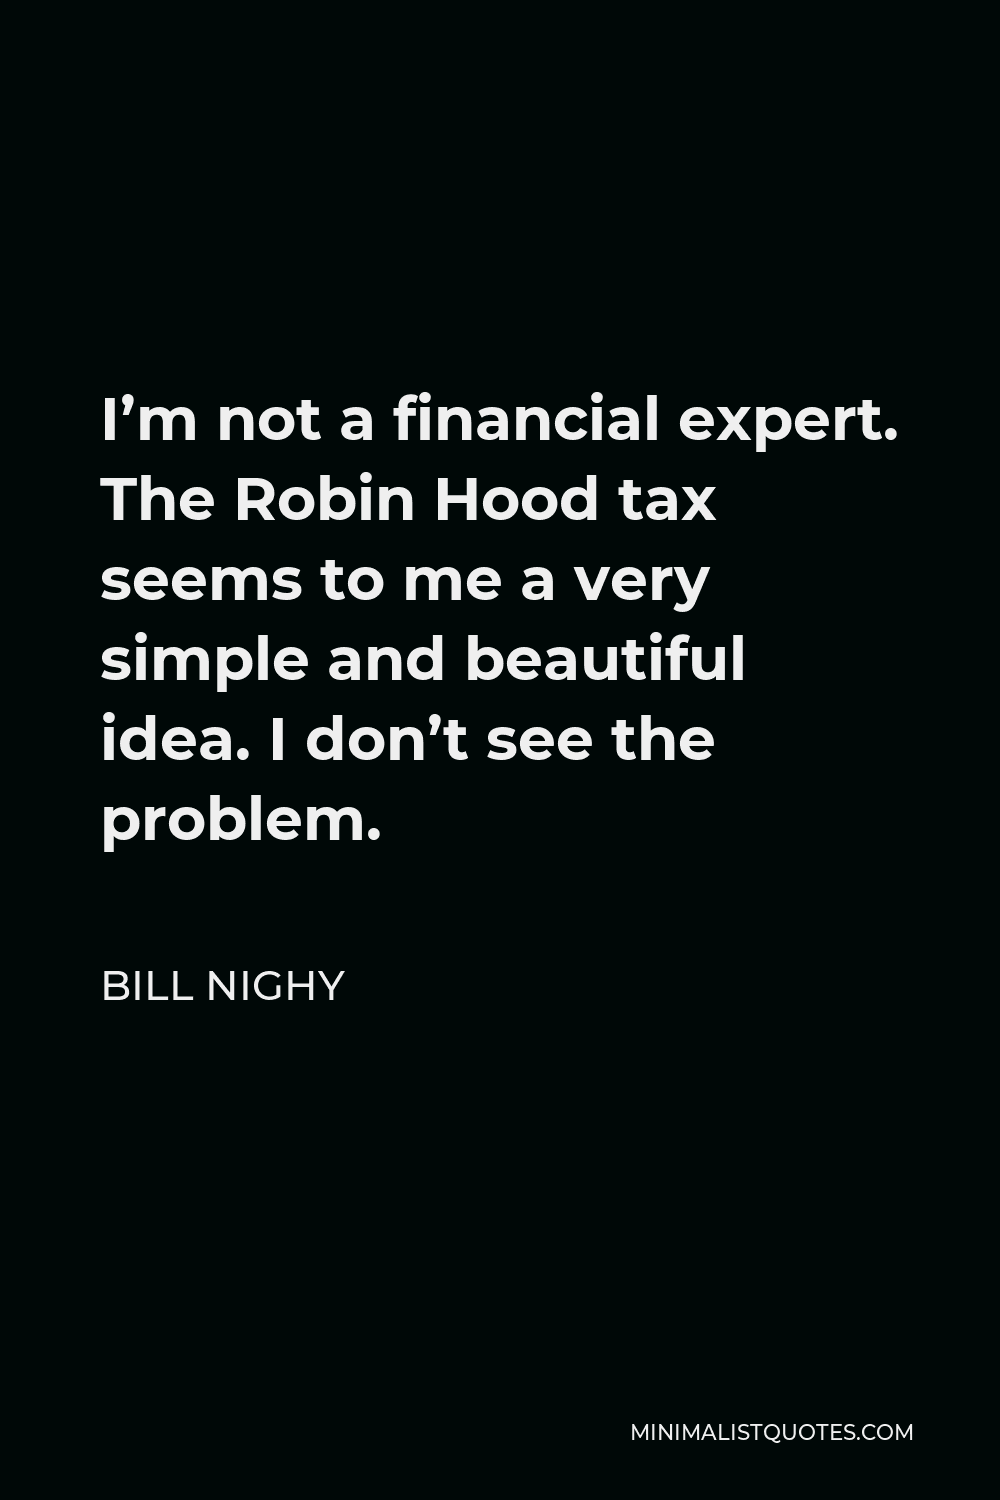 Bill Nighy Quote - I’m not a financial expert. The Robin Hood tax seems to me a very simple and beautiful idea. I don’t see the problem.